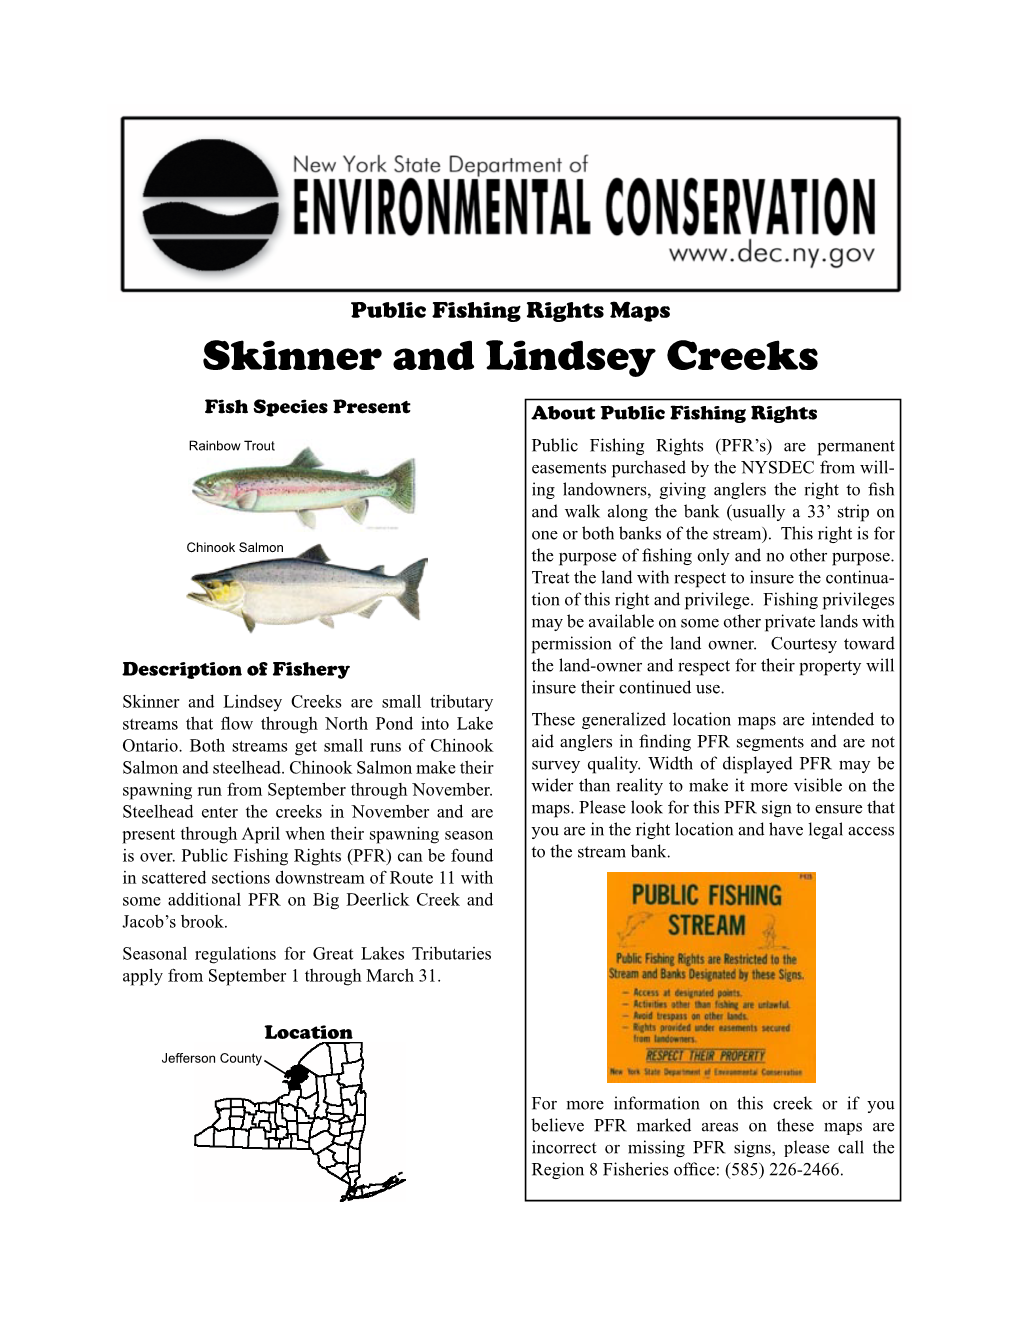 Public Fishing Rights: Skinner and Lindsey Creeks